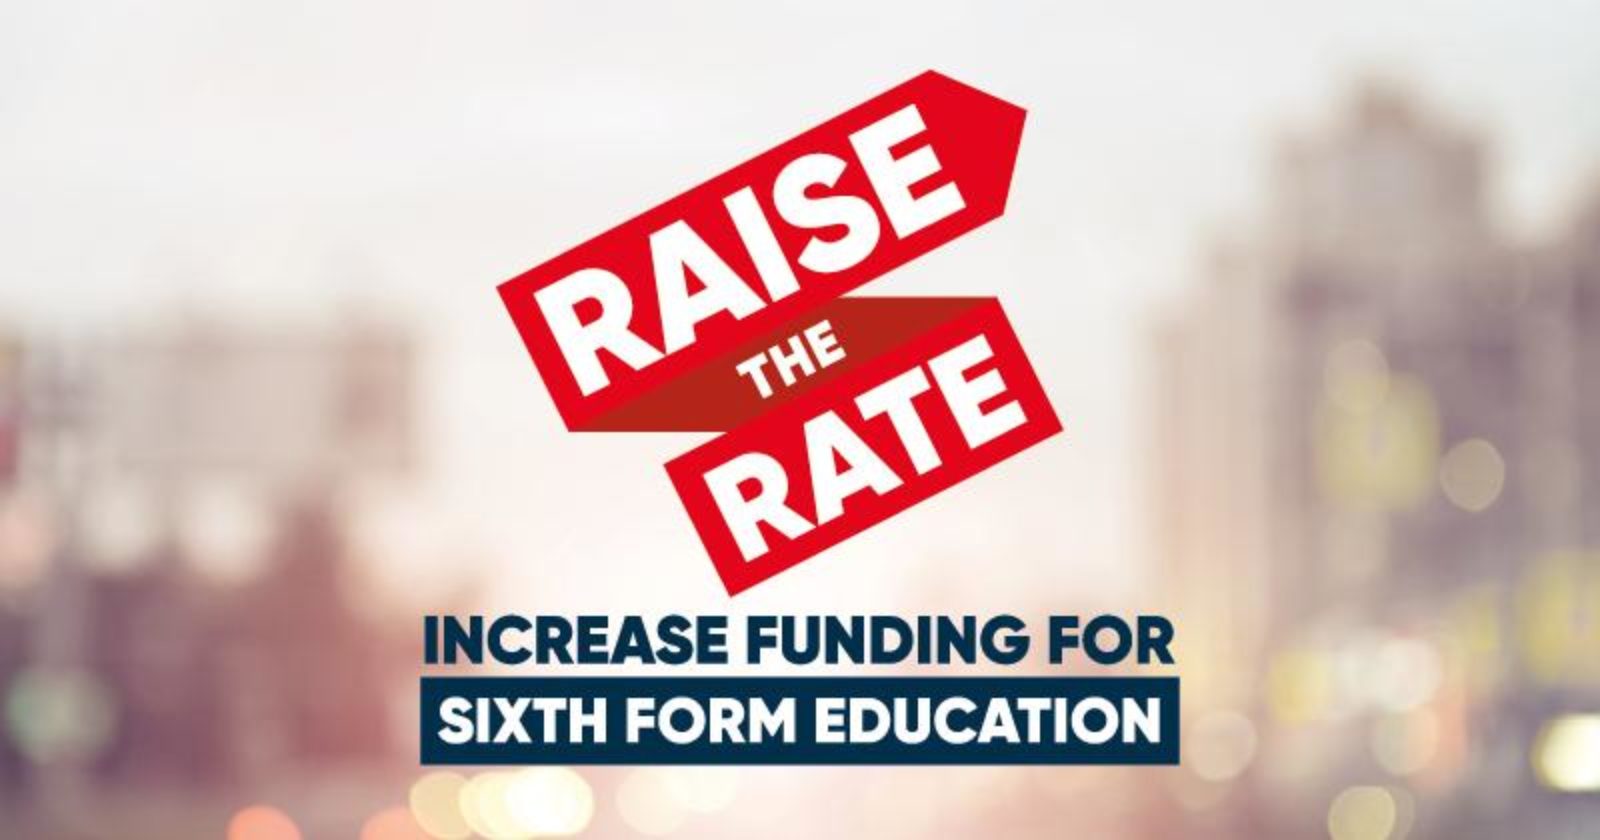 Increase funding for sixth form education banner.